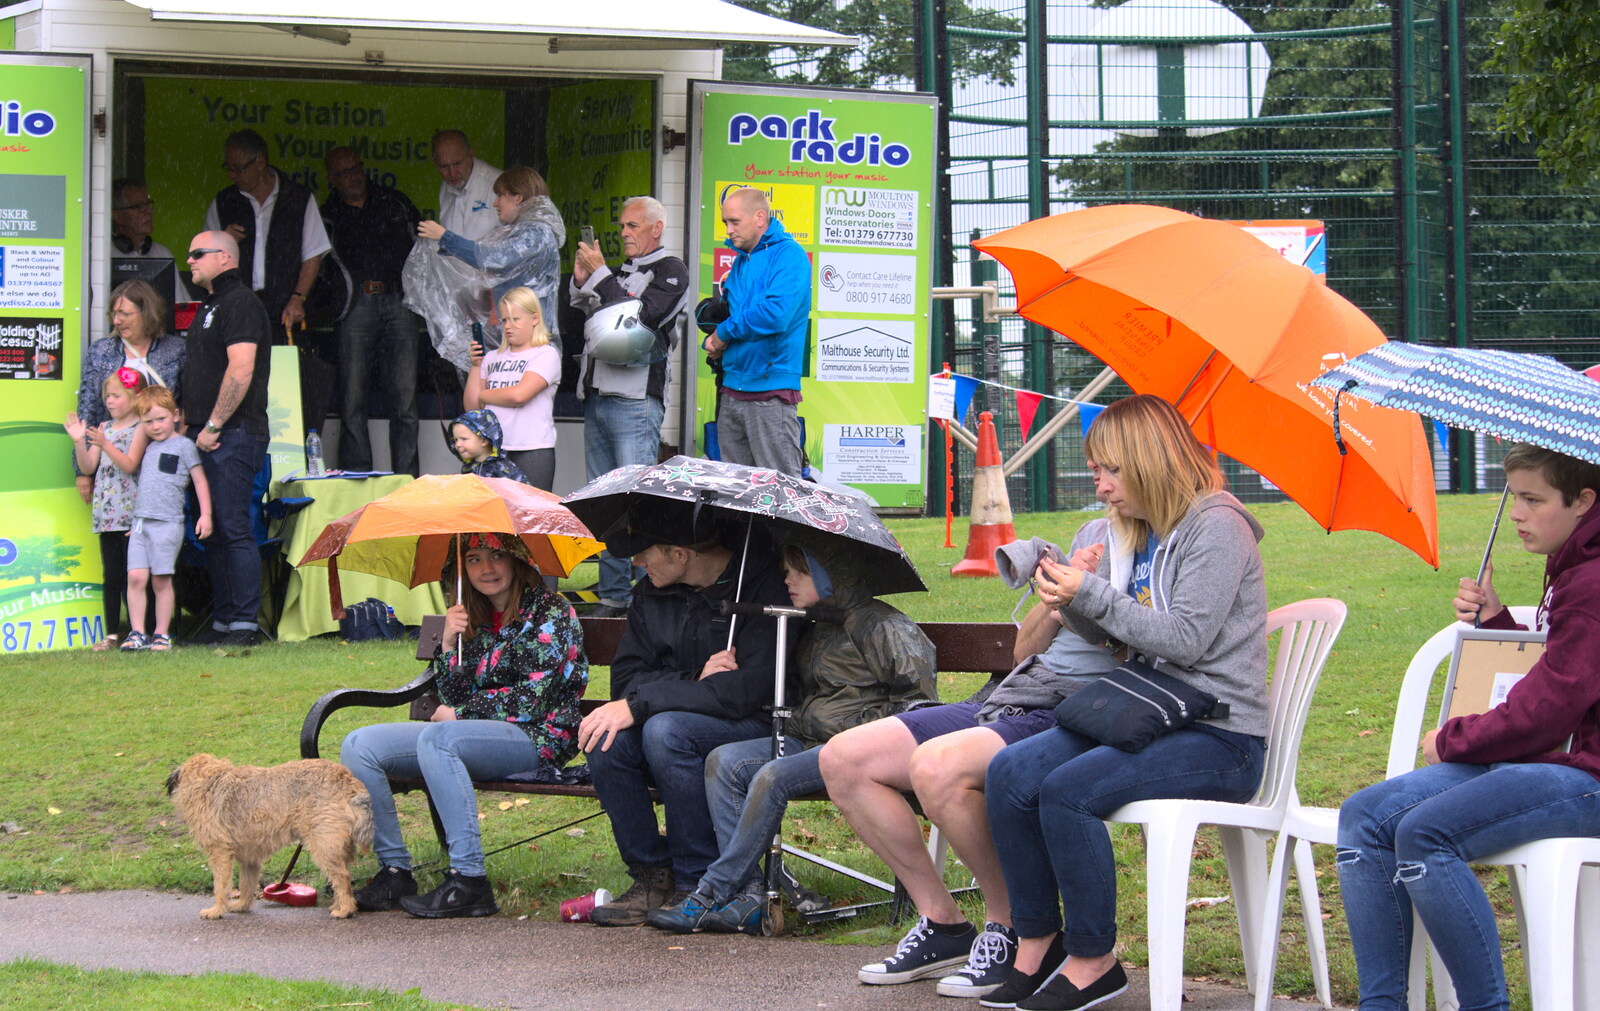 More of the audience shelter from the rain from Diss Fest, or Singin' in the Rain, Diss, Norfolk - 23rd July 2017